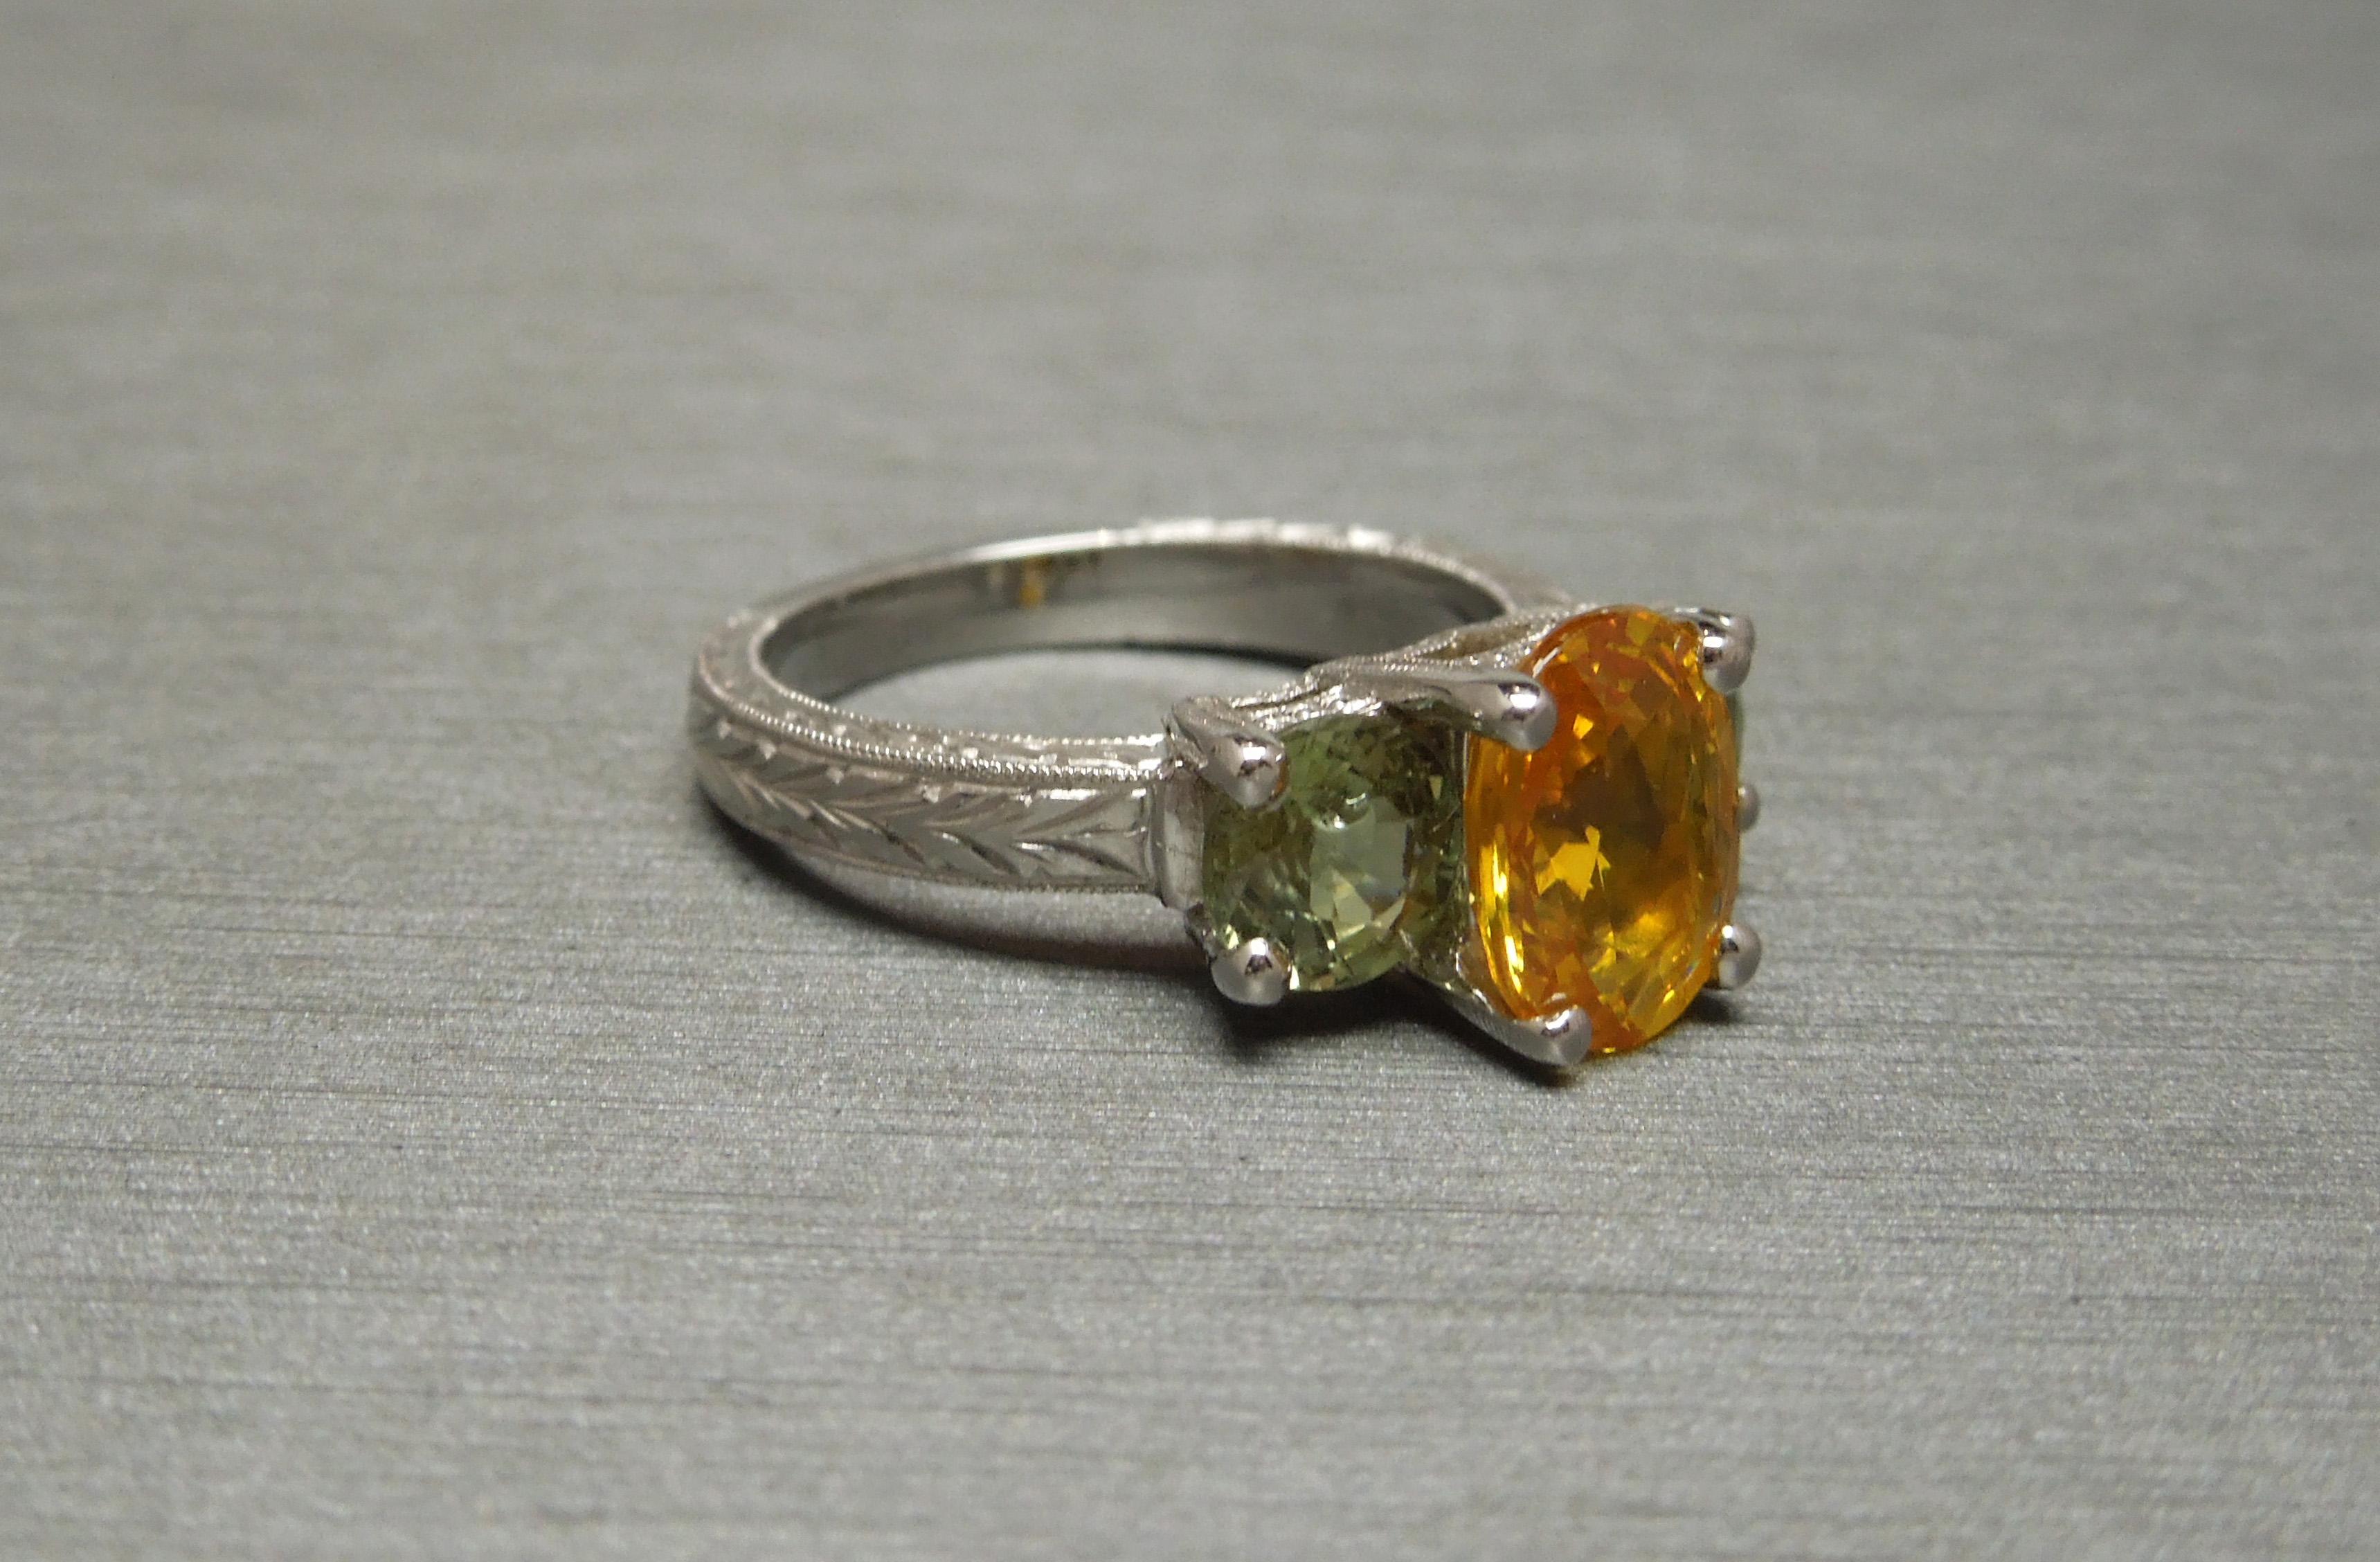 This Orange & Green Sapphire Three-Stone Ring features 3 Pastel-shade Natural Sapphires in the two most prominent earth tones: a Golden Orange & an Earthy Green, representing the Sun & Earth. Central Oval cut weighing 2.65 carats at 8.3mm x 6.1mm &